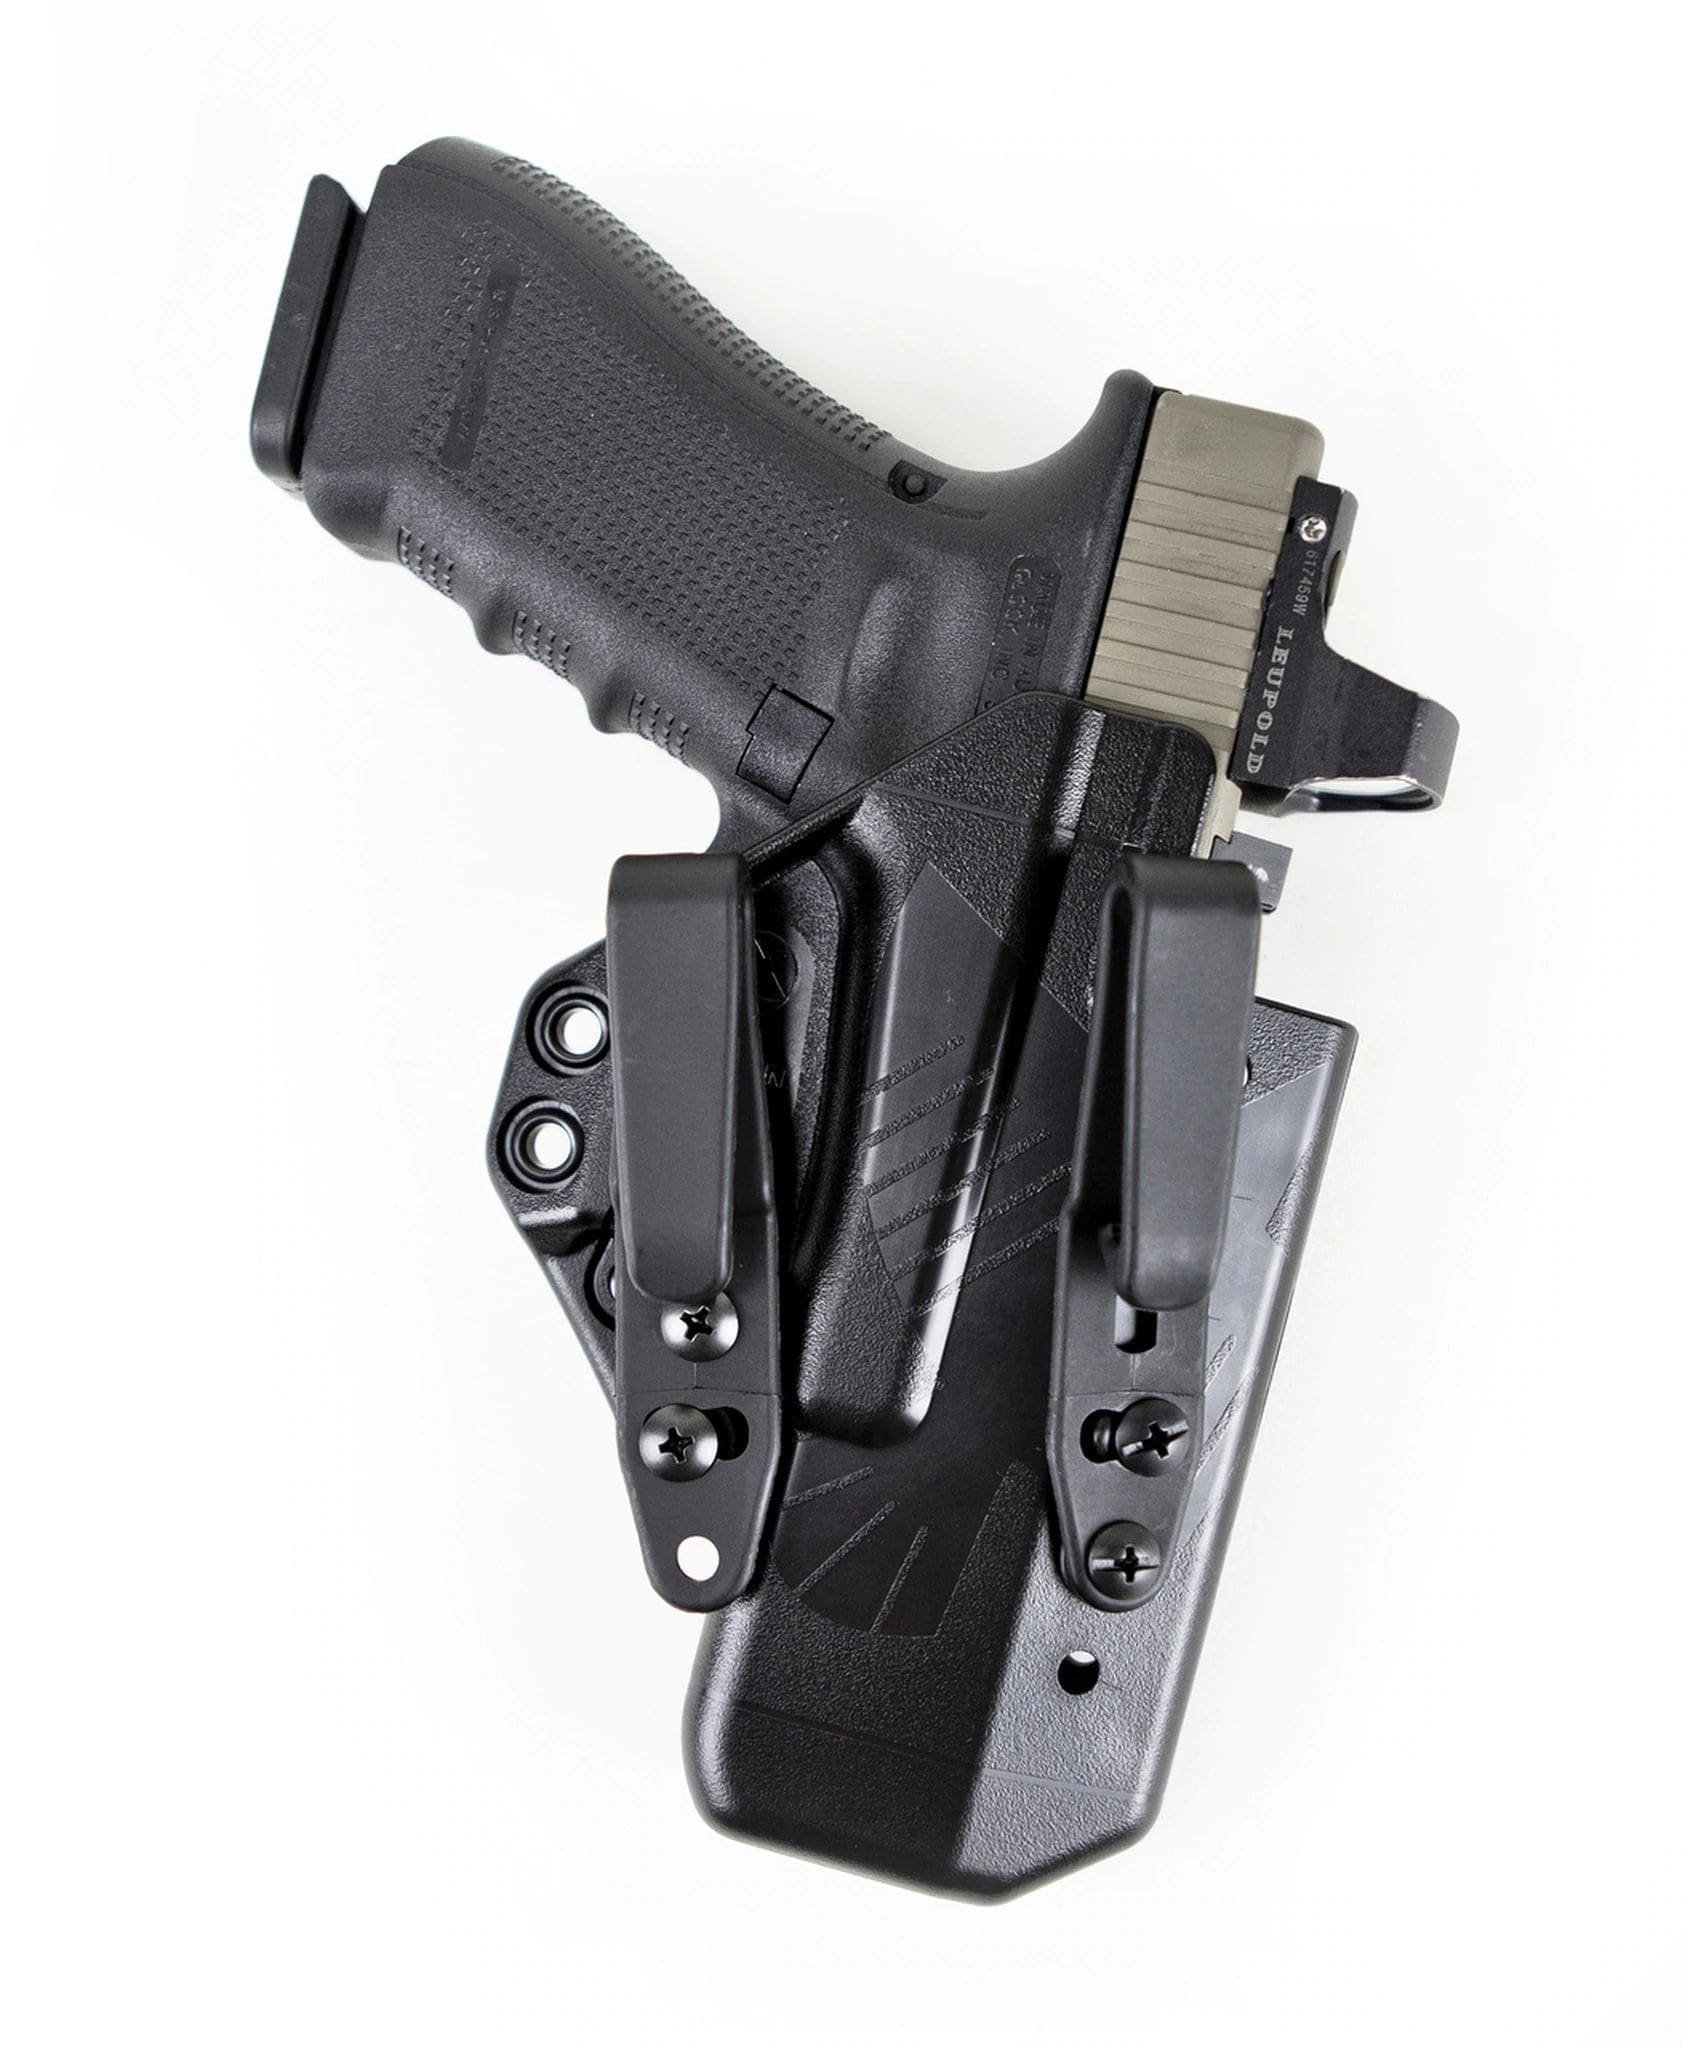  Black Jacket Holsters for Glock 17/22, Inside Waistband  Concealed Carry Holster